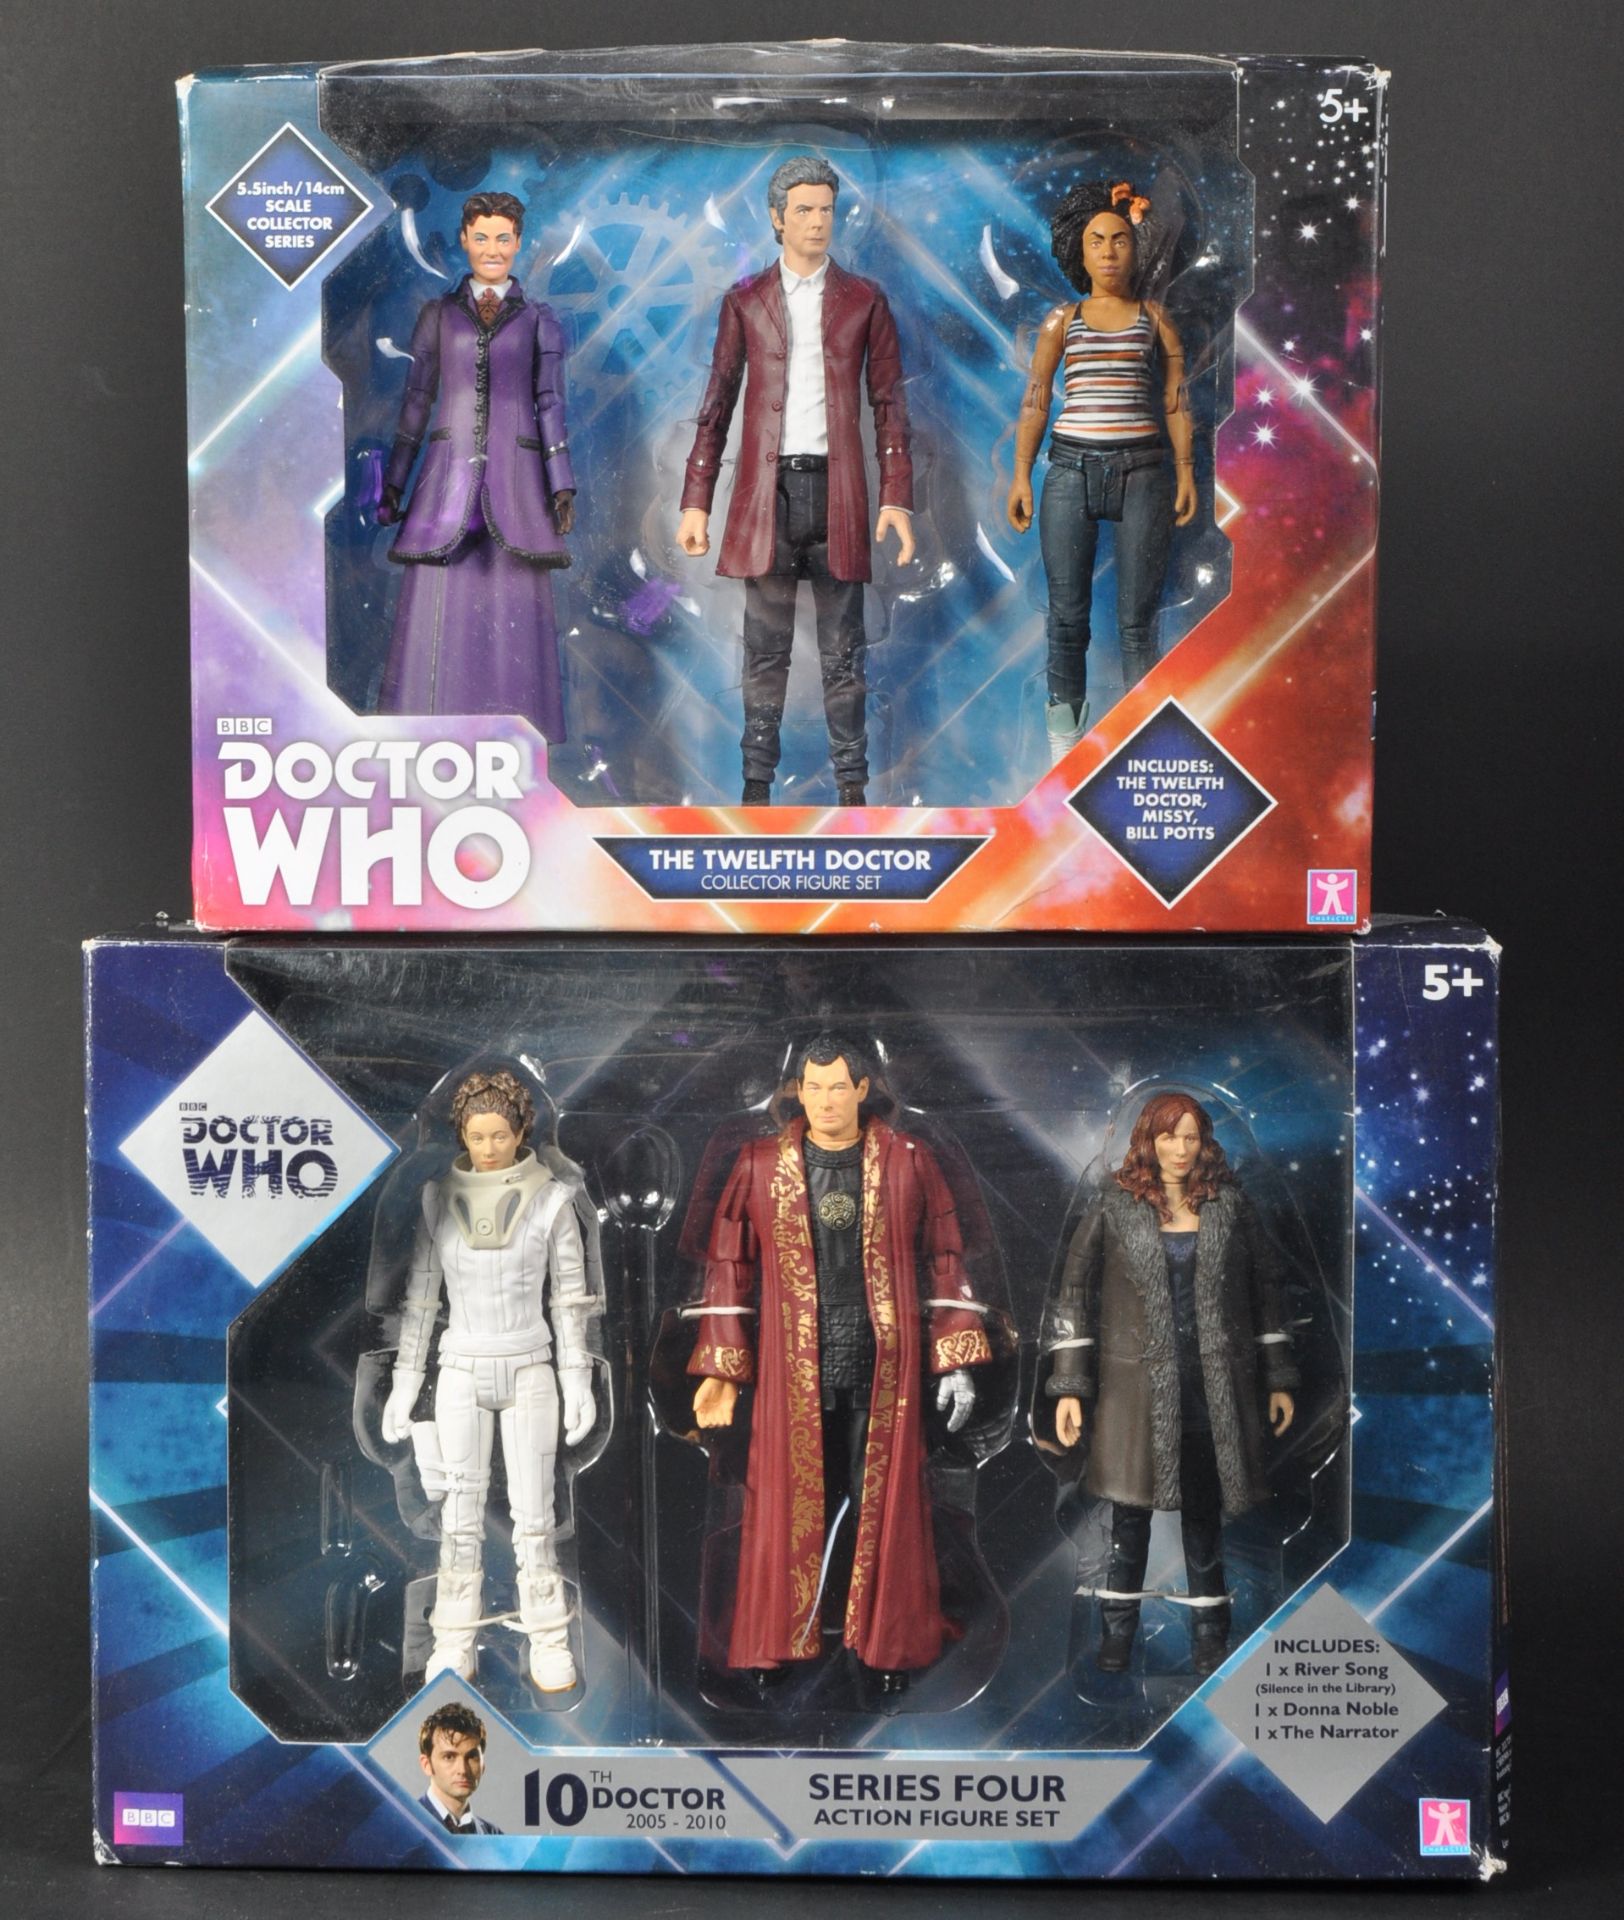 DOCTOR WHO - CHARACTER - TWO BOXED ACTION FIGURE SETS